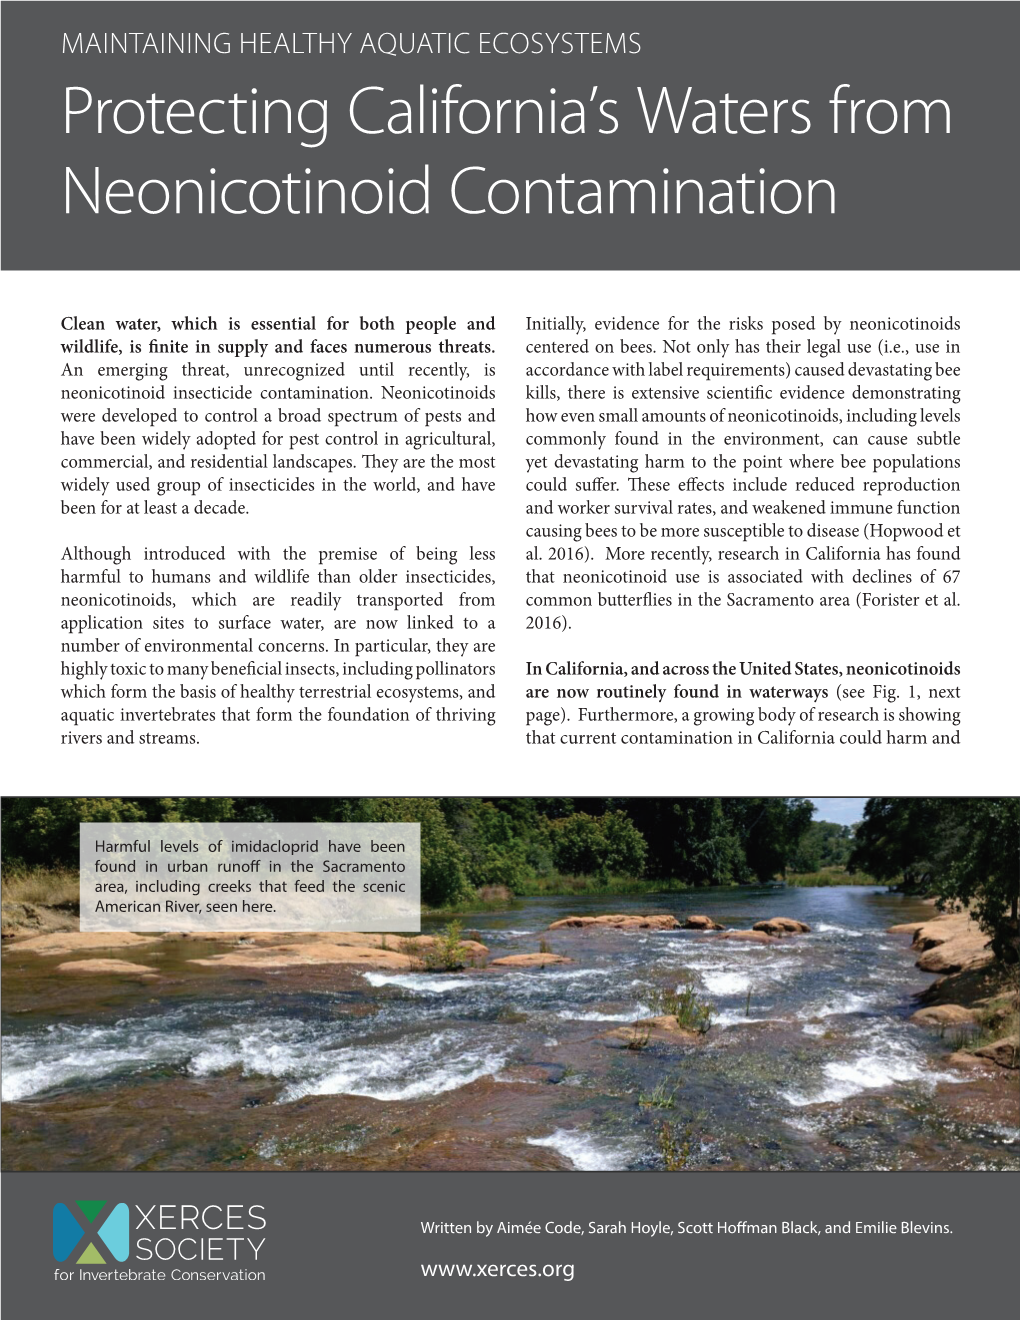 Protecting California's Waters from Neonicotinoid Contamination